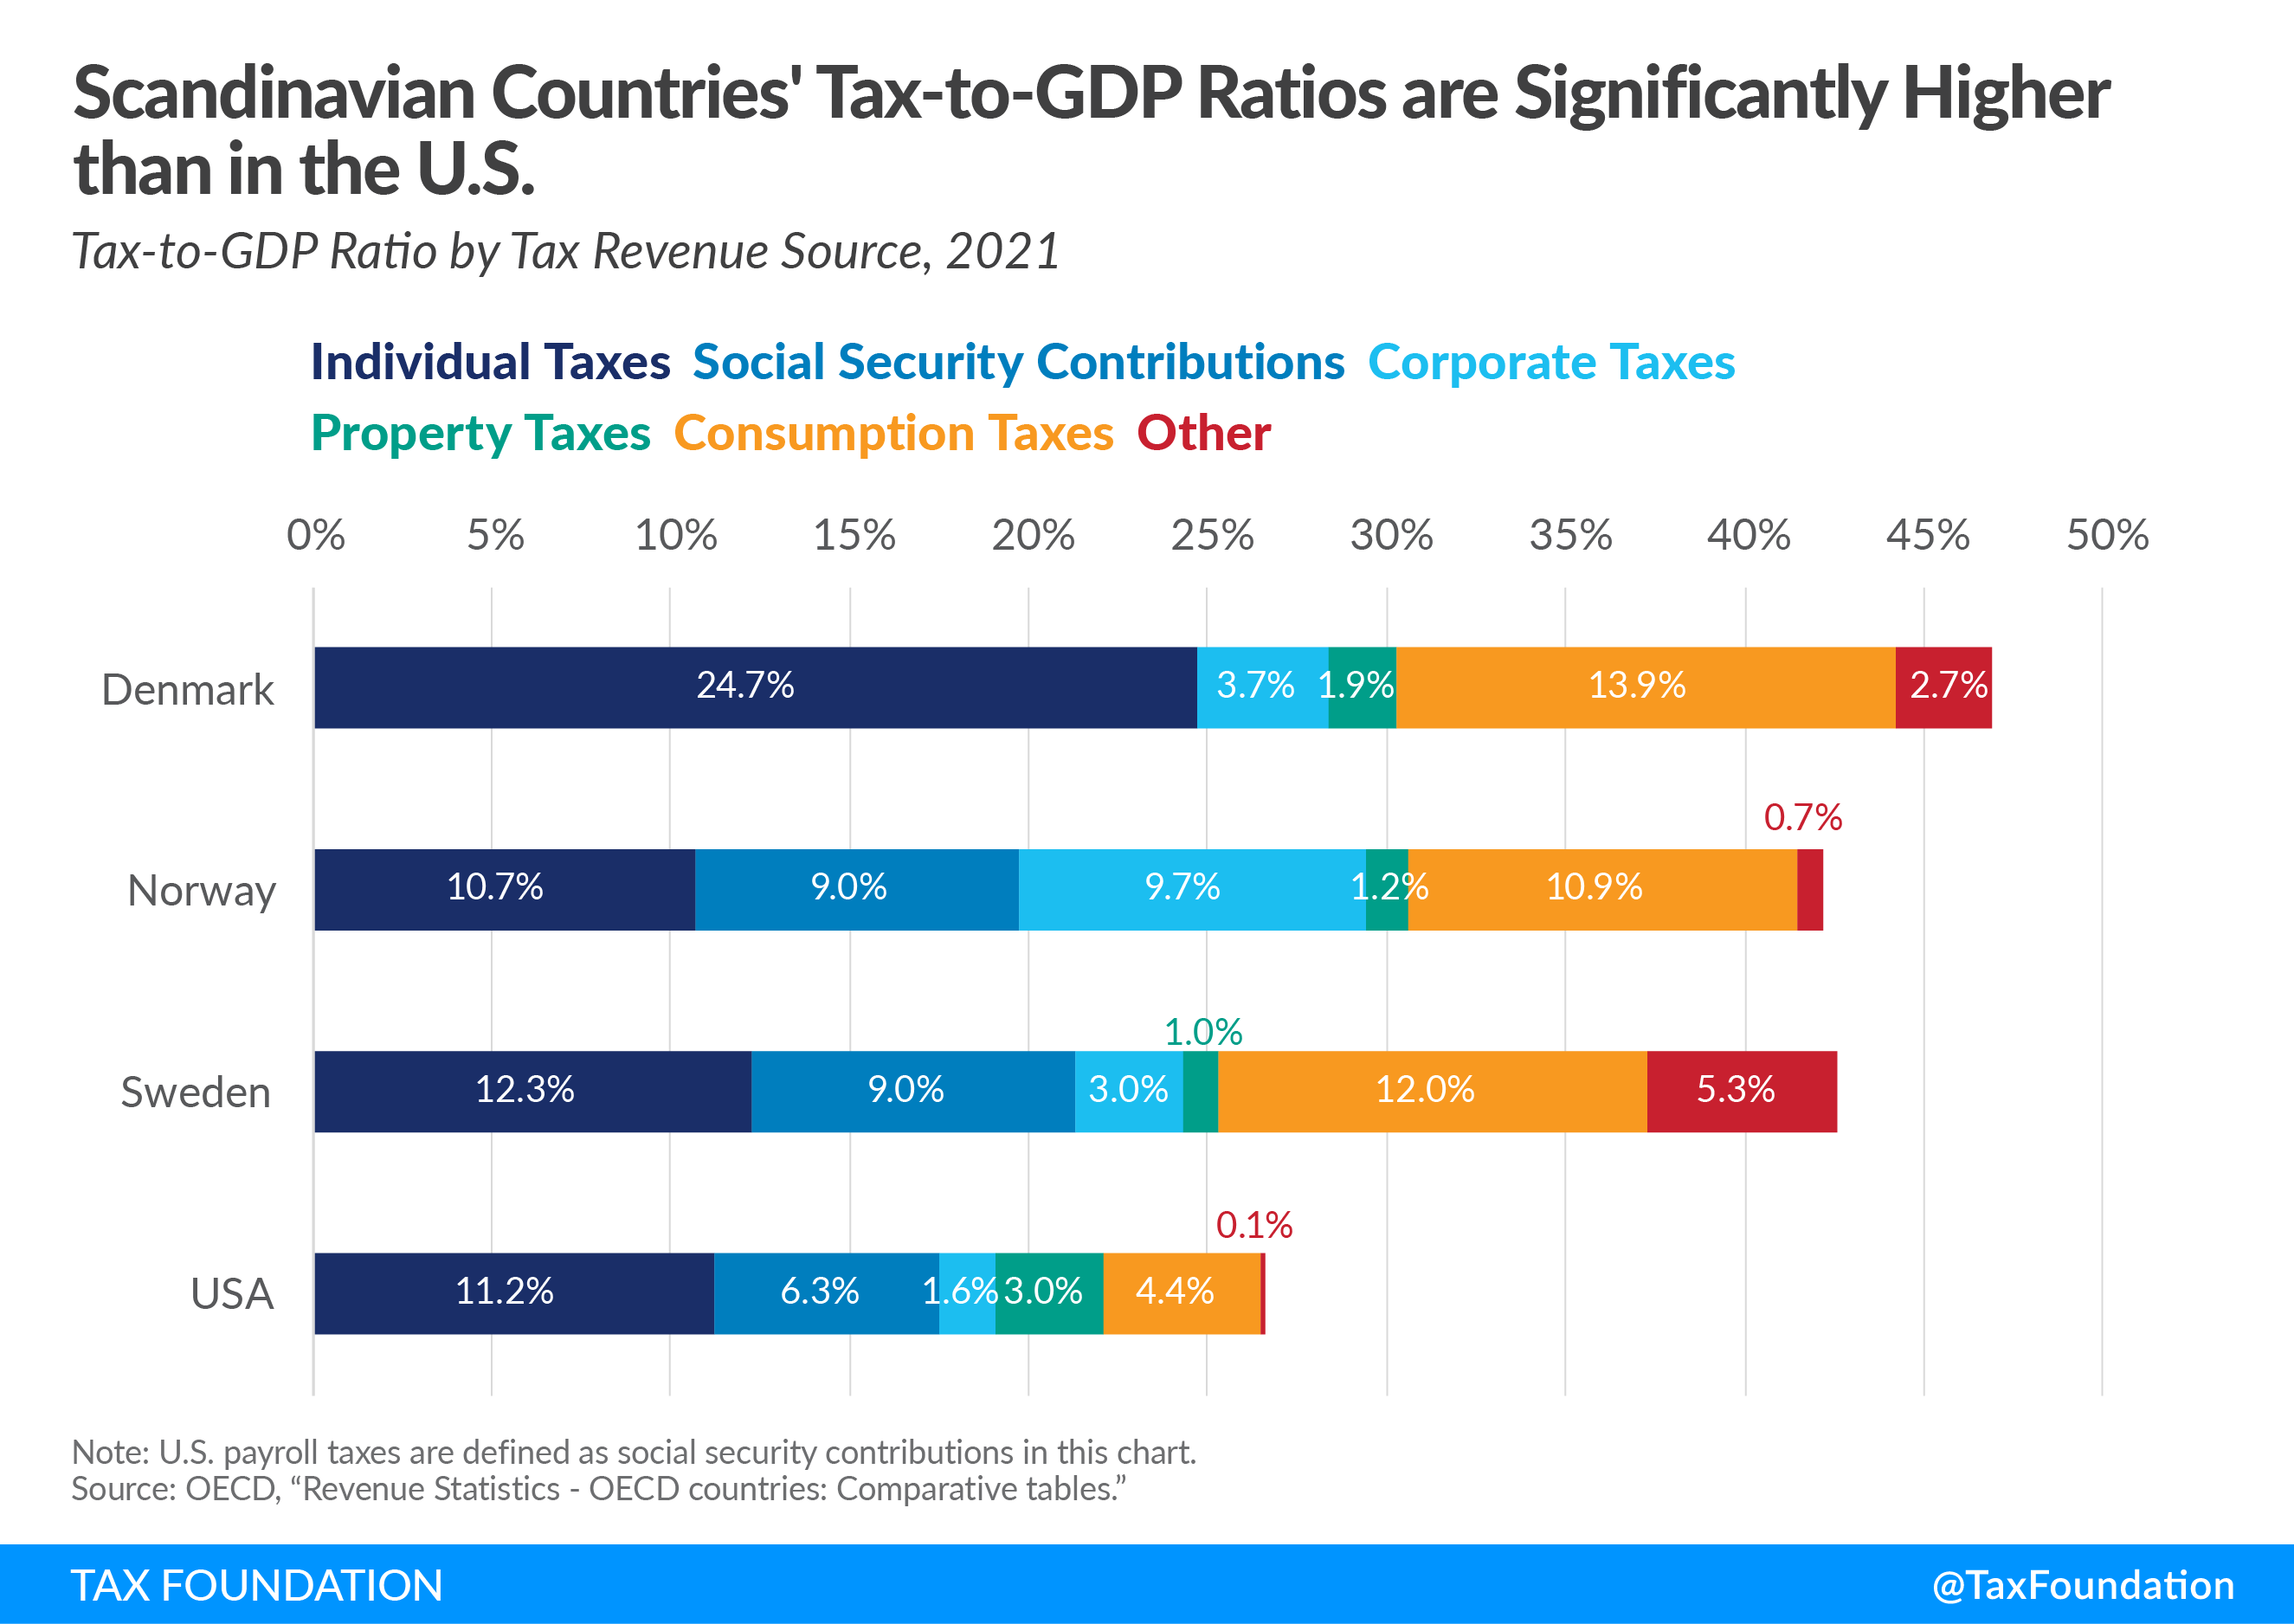 Scandinavian countries are well known for their broad social safety net and their public funding of services such as universal health care, higher education, parental leave, and child and elderly care. High levels of government spending naturally require high levels of taxation.